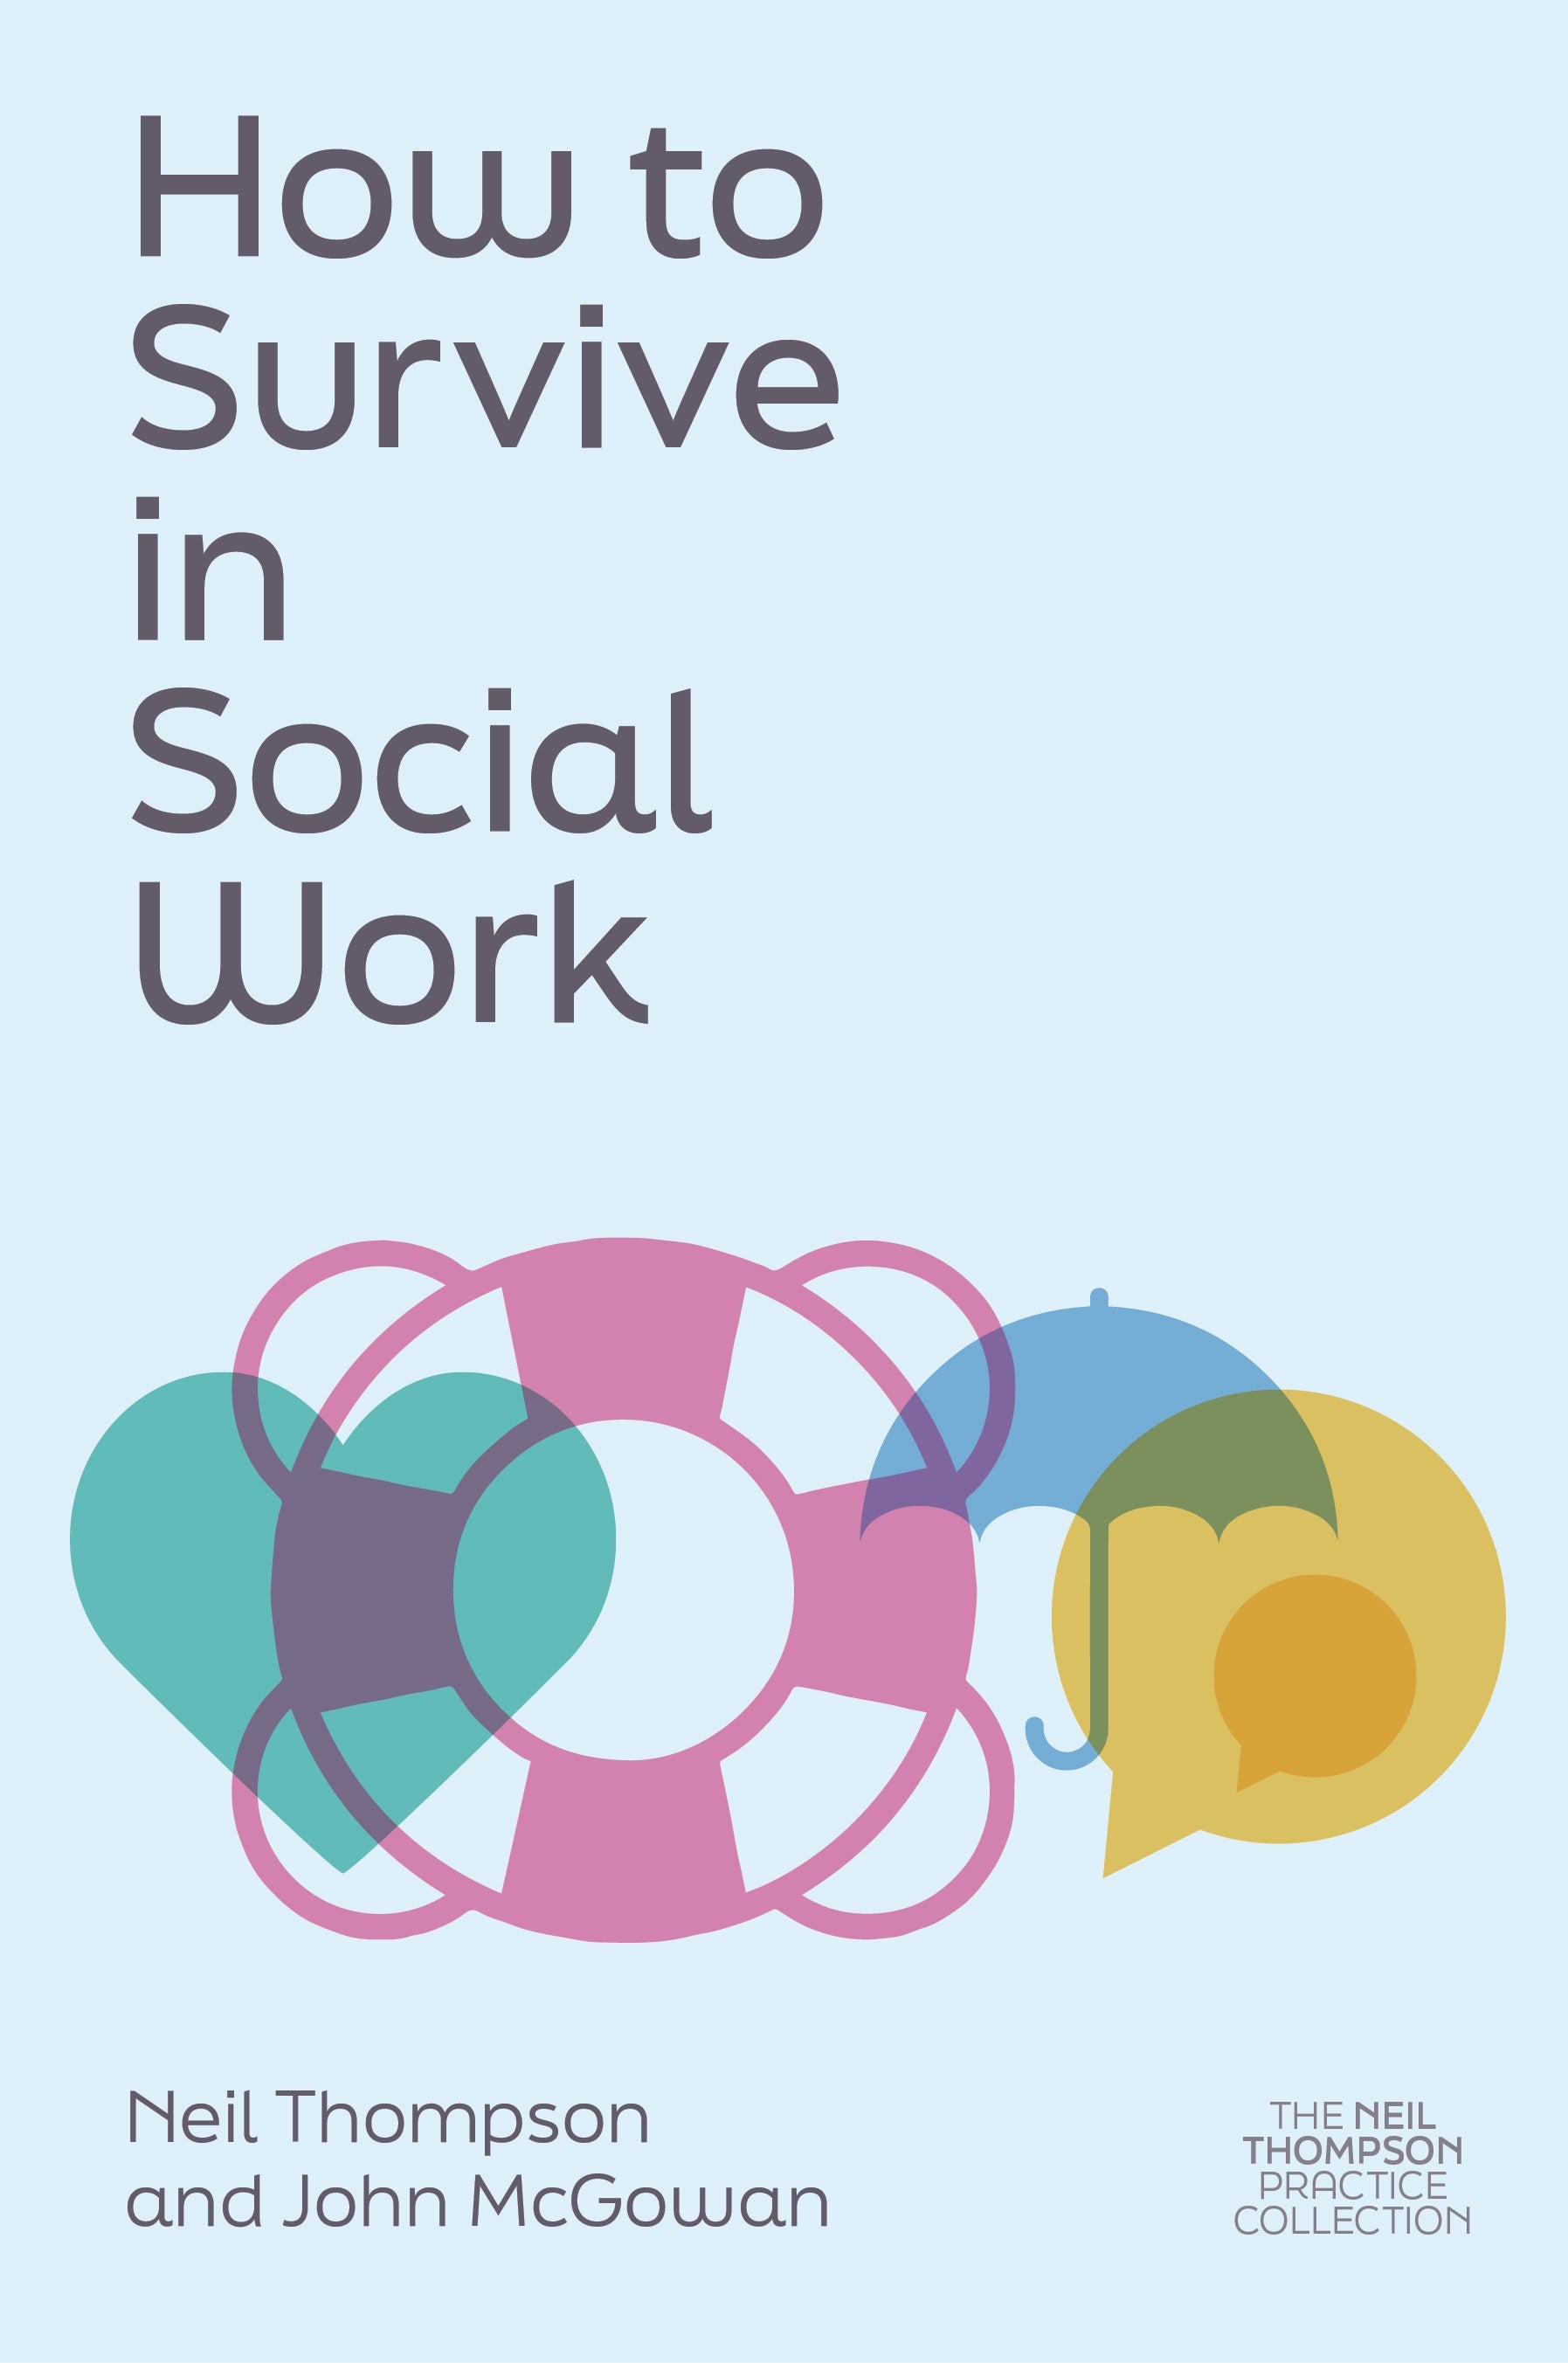 How to Survive in Social Work by Ruth Allen, Neil Thompson, John McGowan